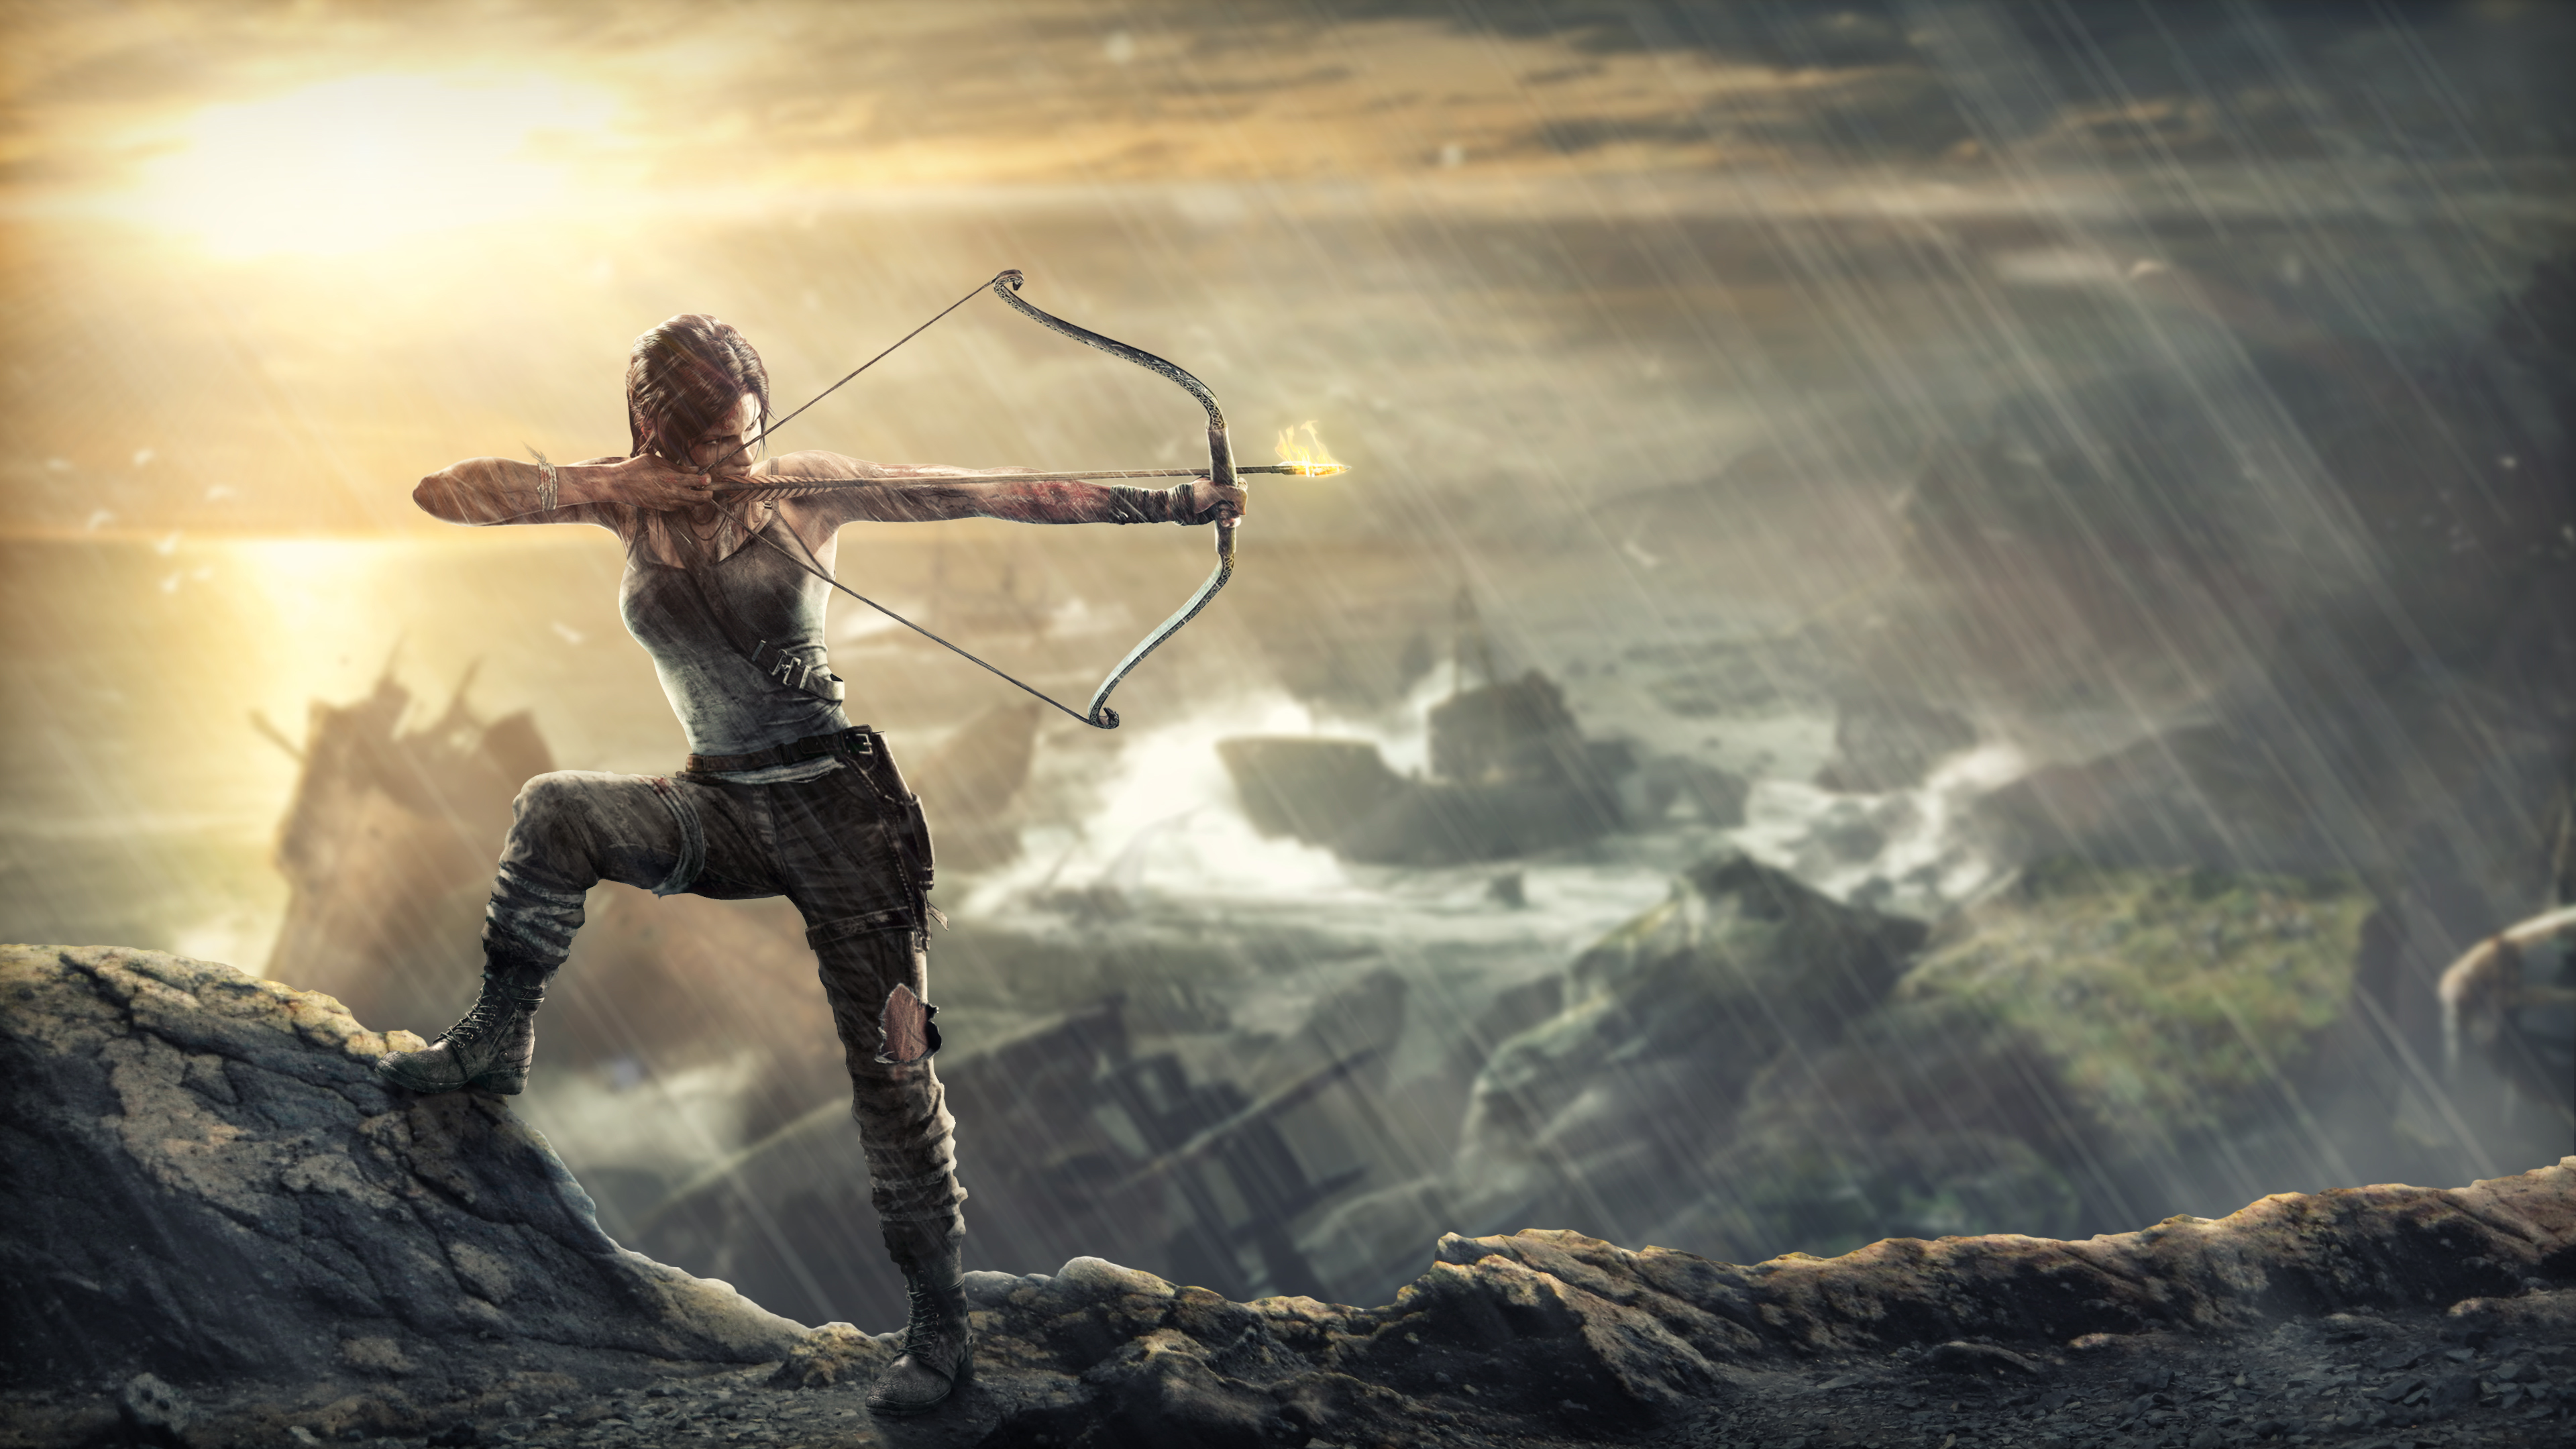 tomb raider 2013 wallpaper,compound bow,bow and arrow,archery,sky,bow